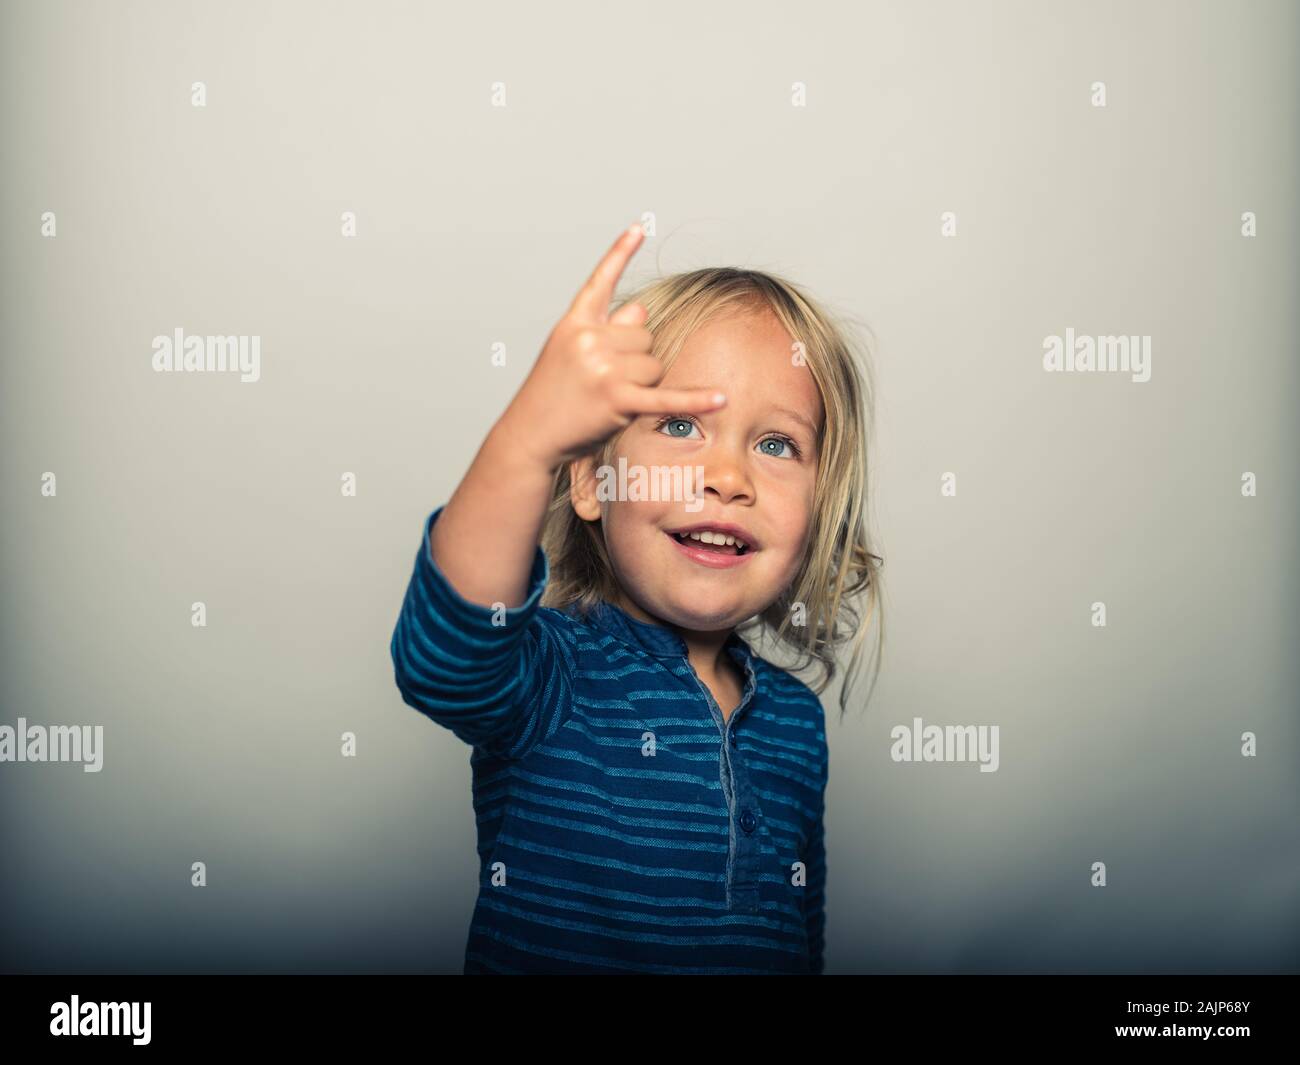 Studio portrait of toddler doing heavy metal sign with his fingers Stock Photo